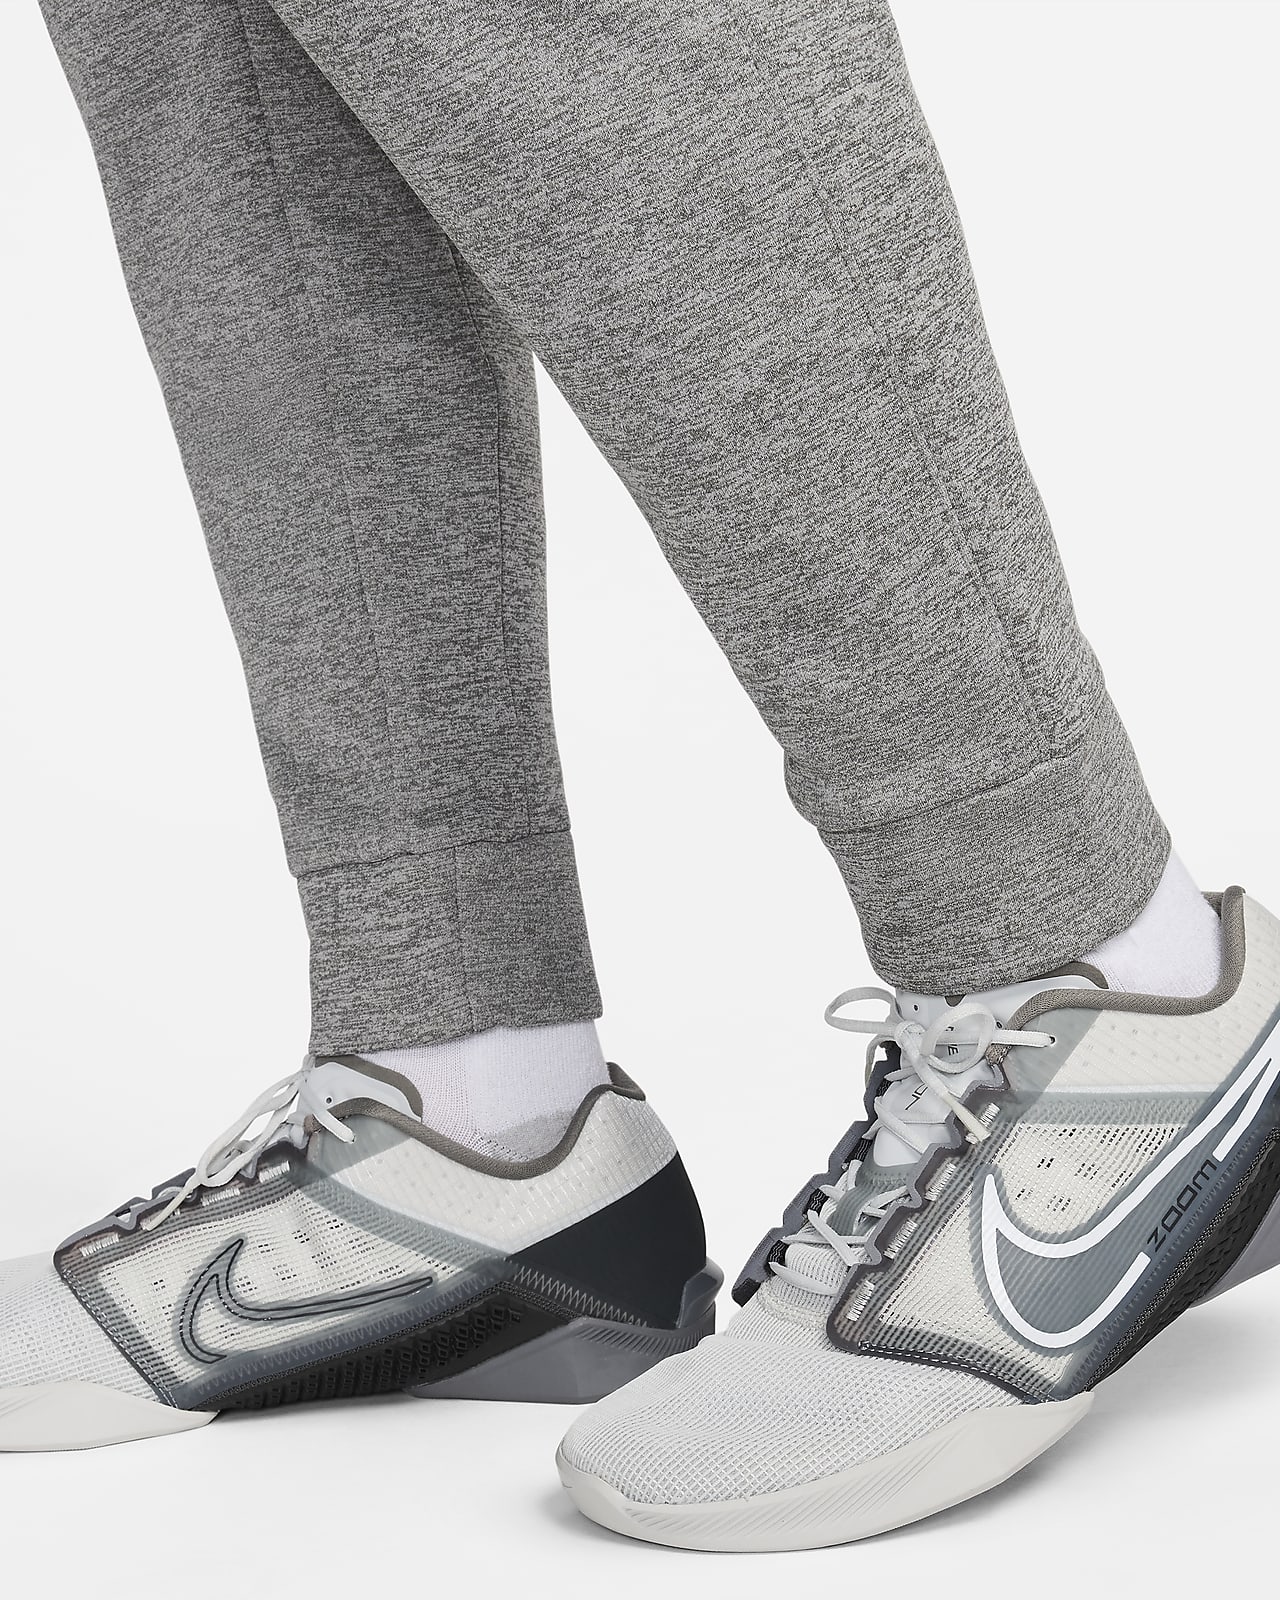 NIKE THERMA-FIT スウェット - スウェット